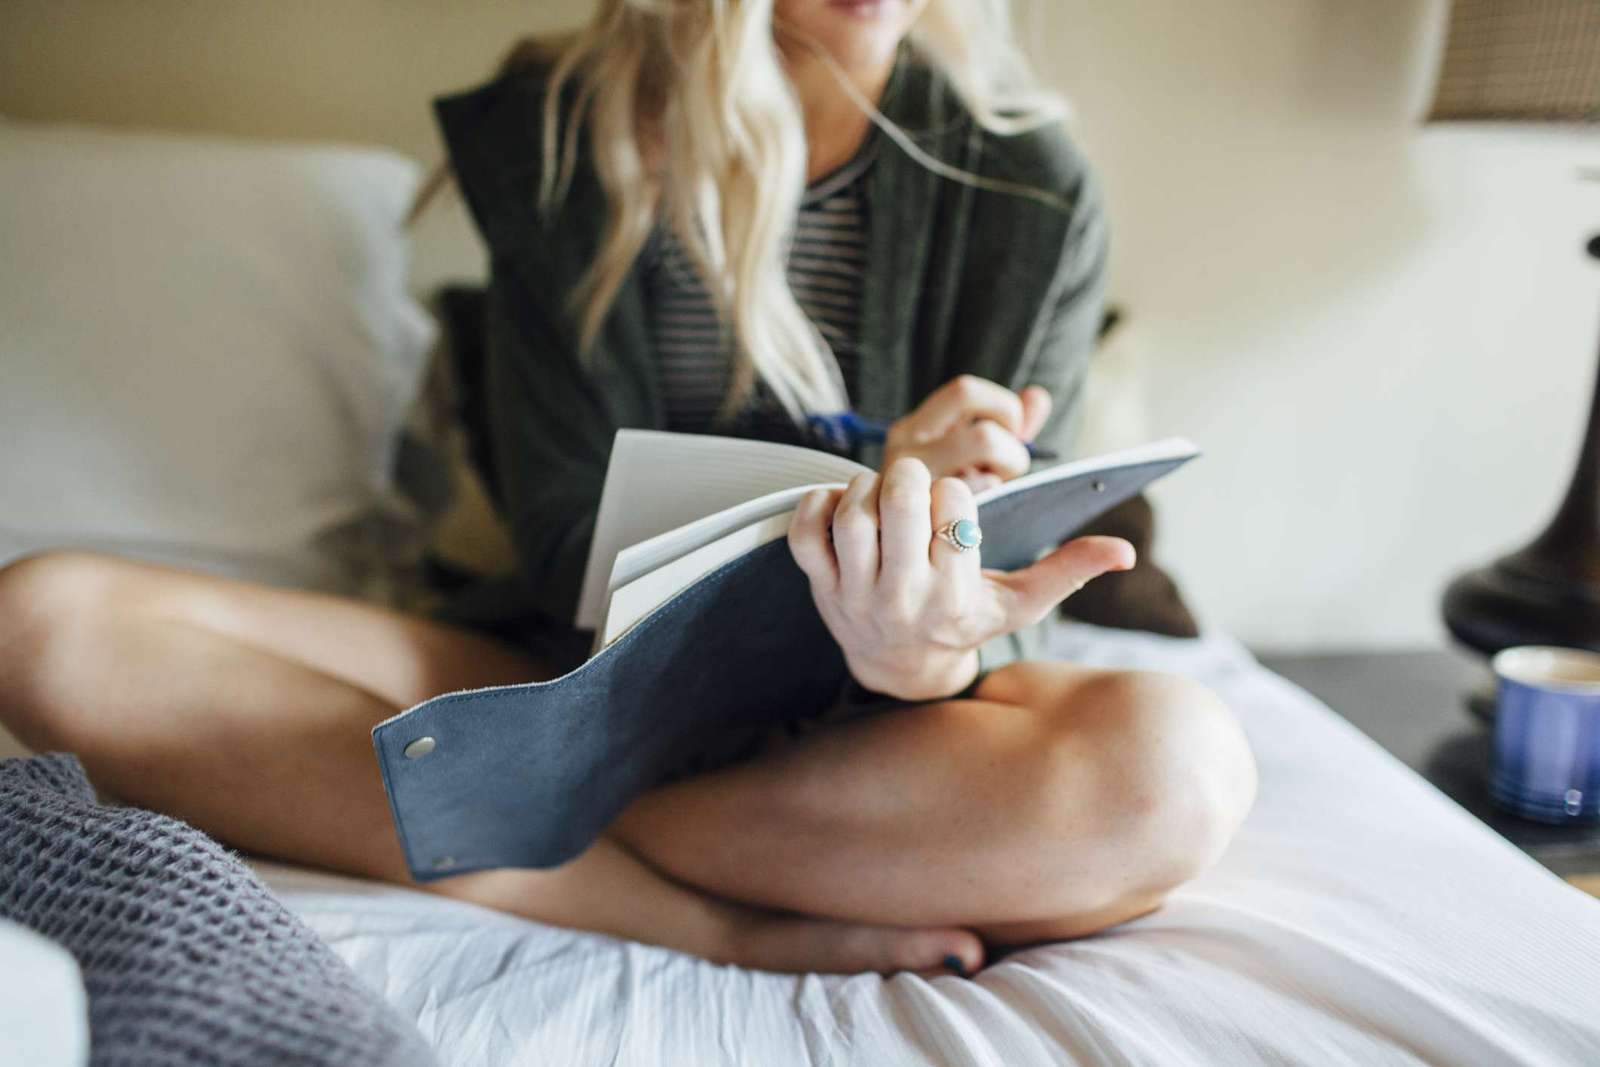 Why Is Journaling Good For Mental Health